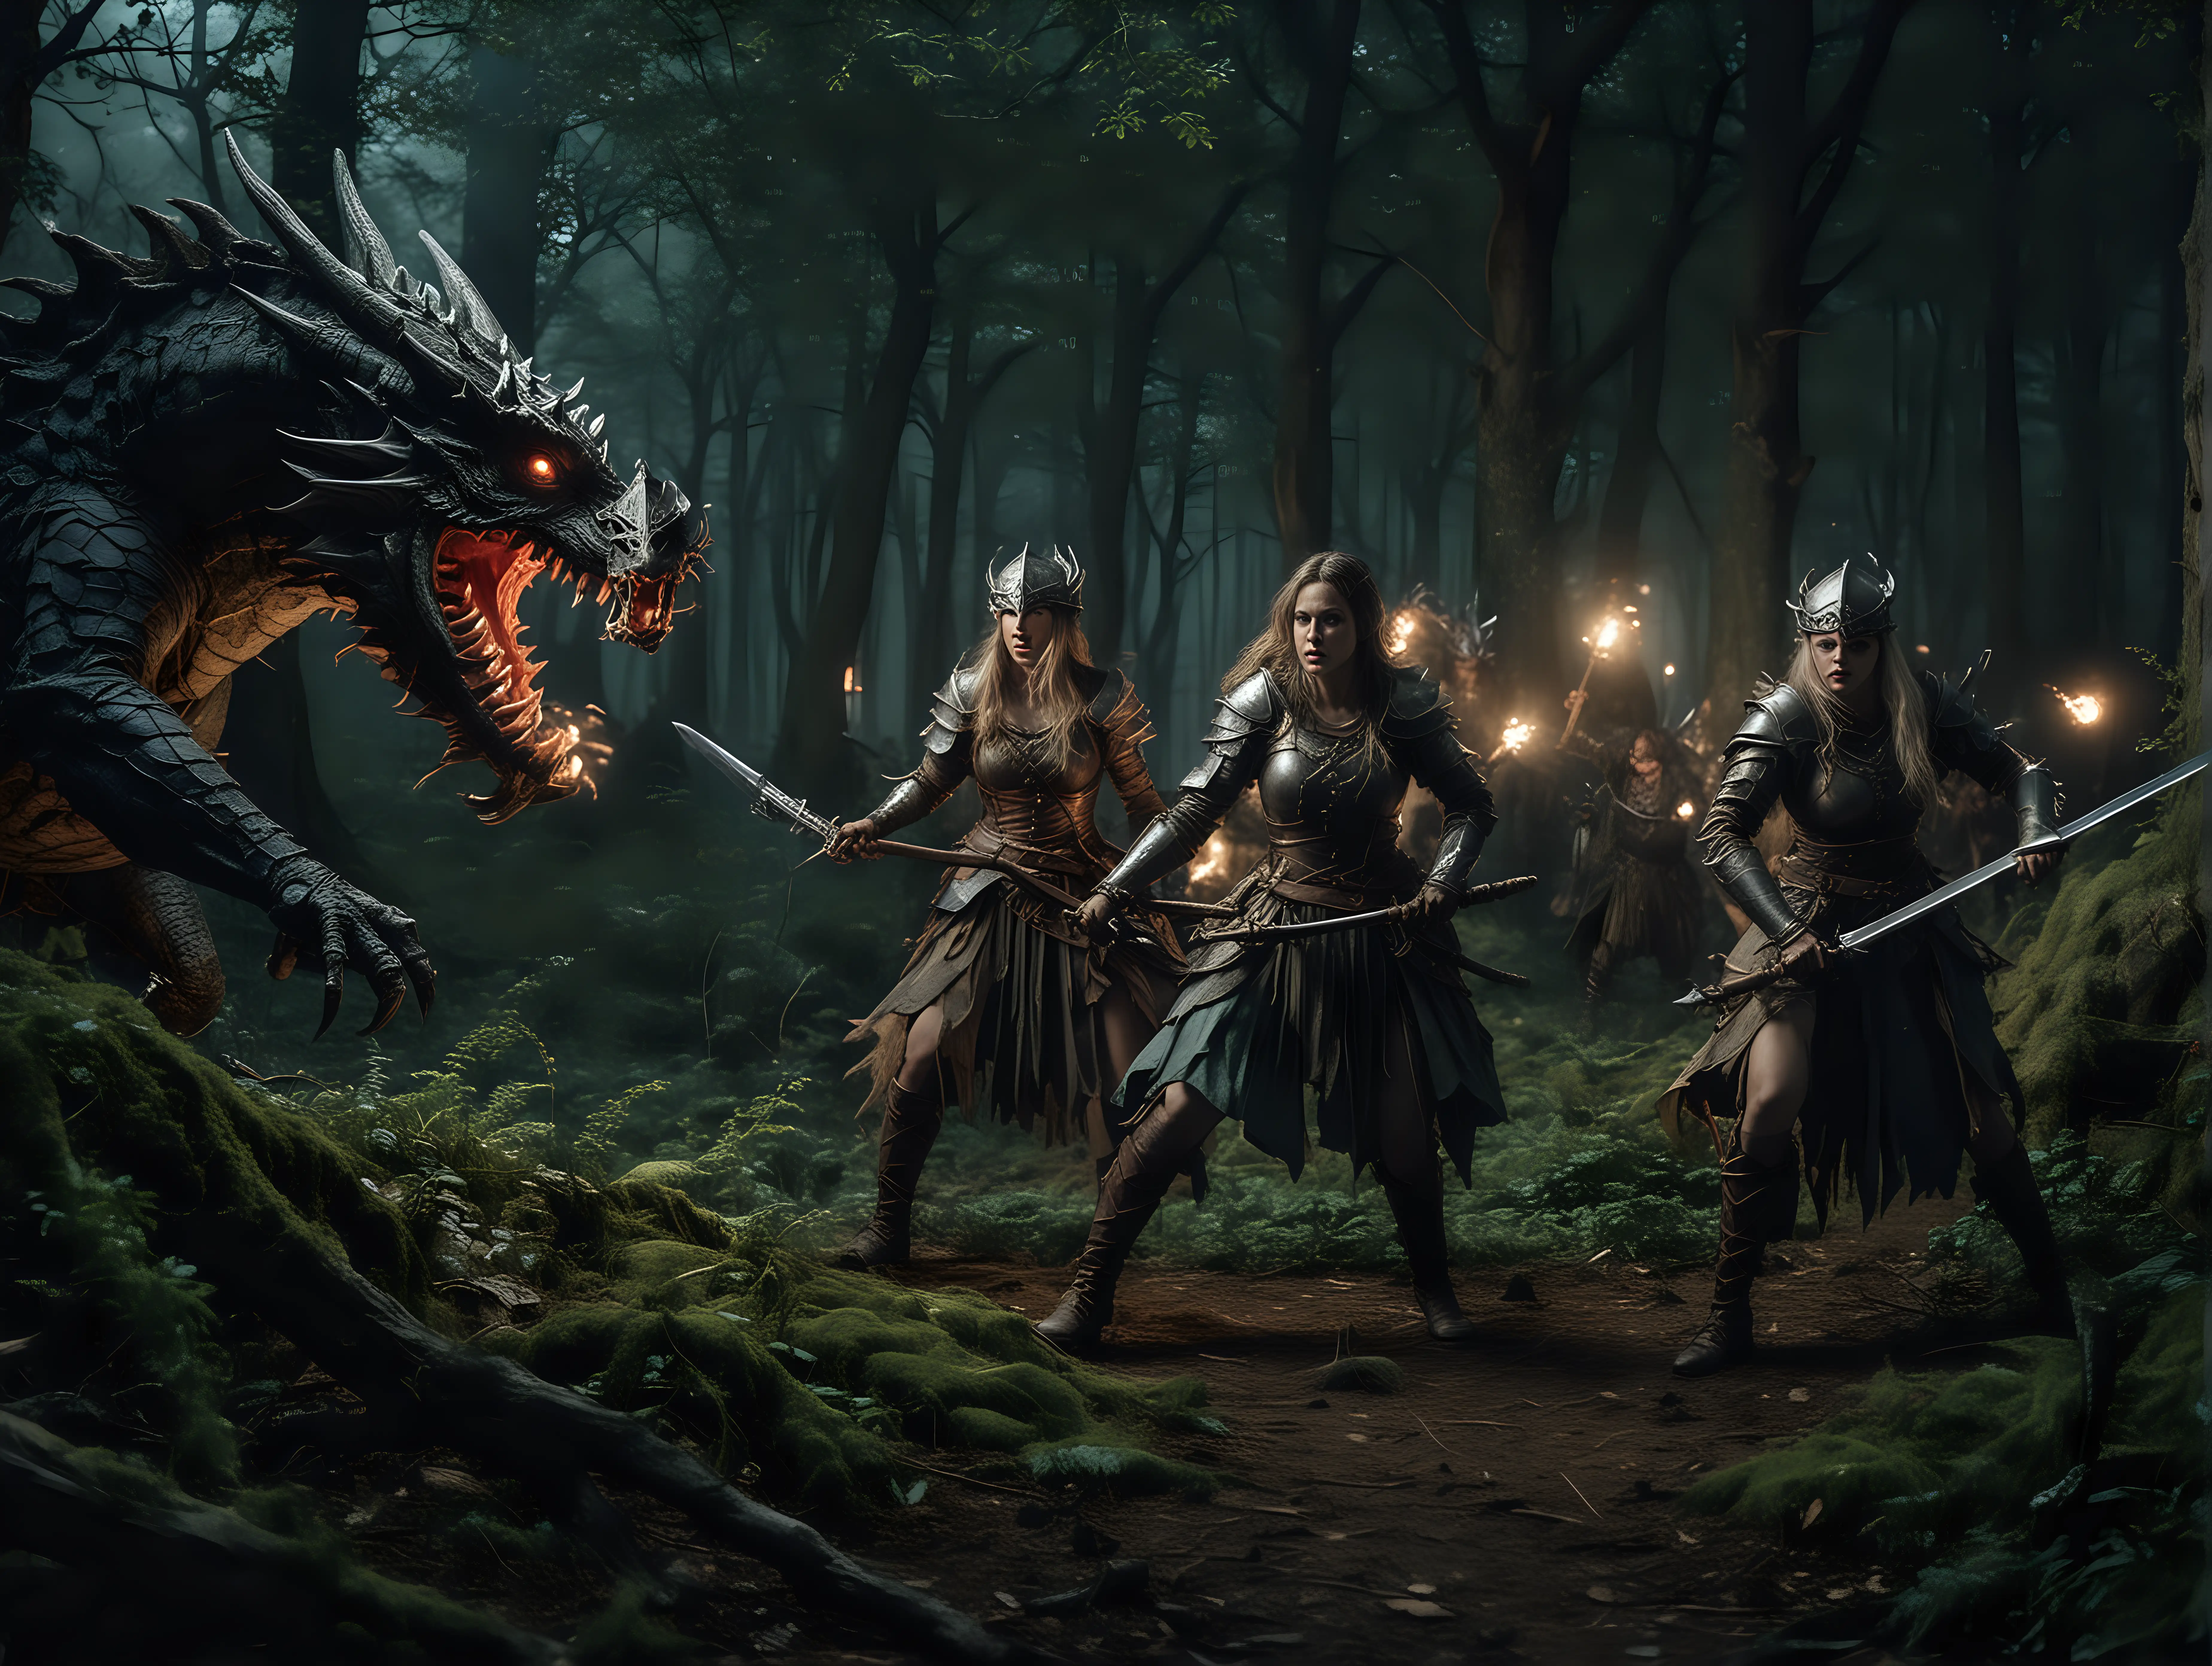 Medieval female warriors fighting trolls and dragons in an enchanted forest at night